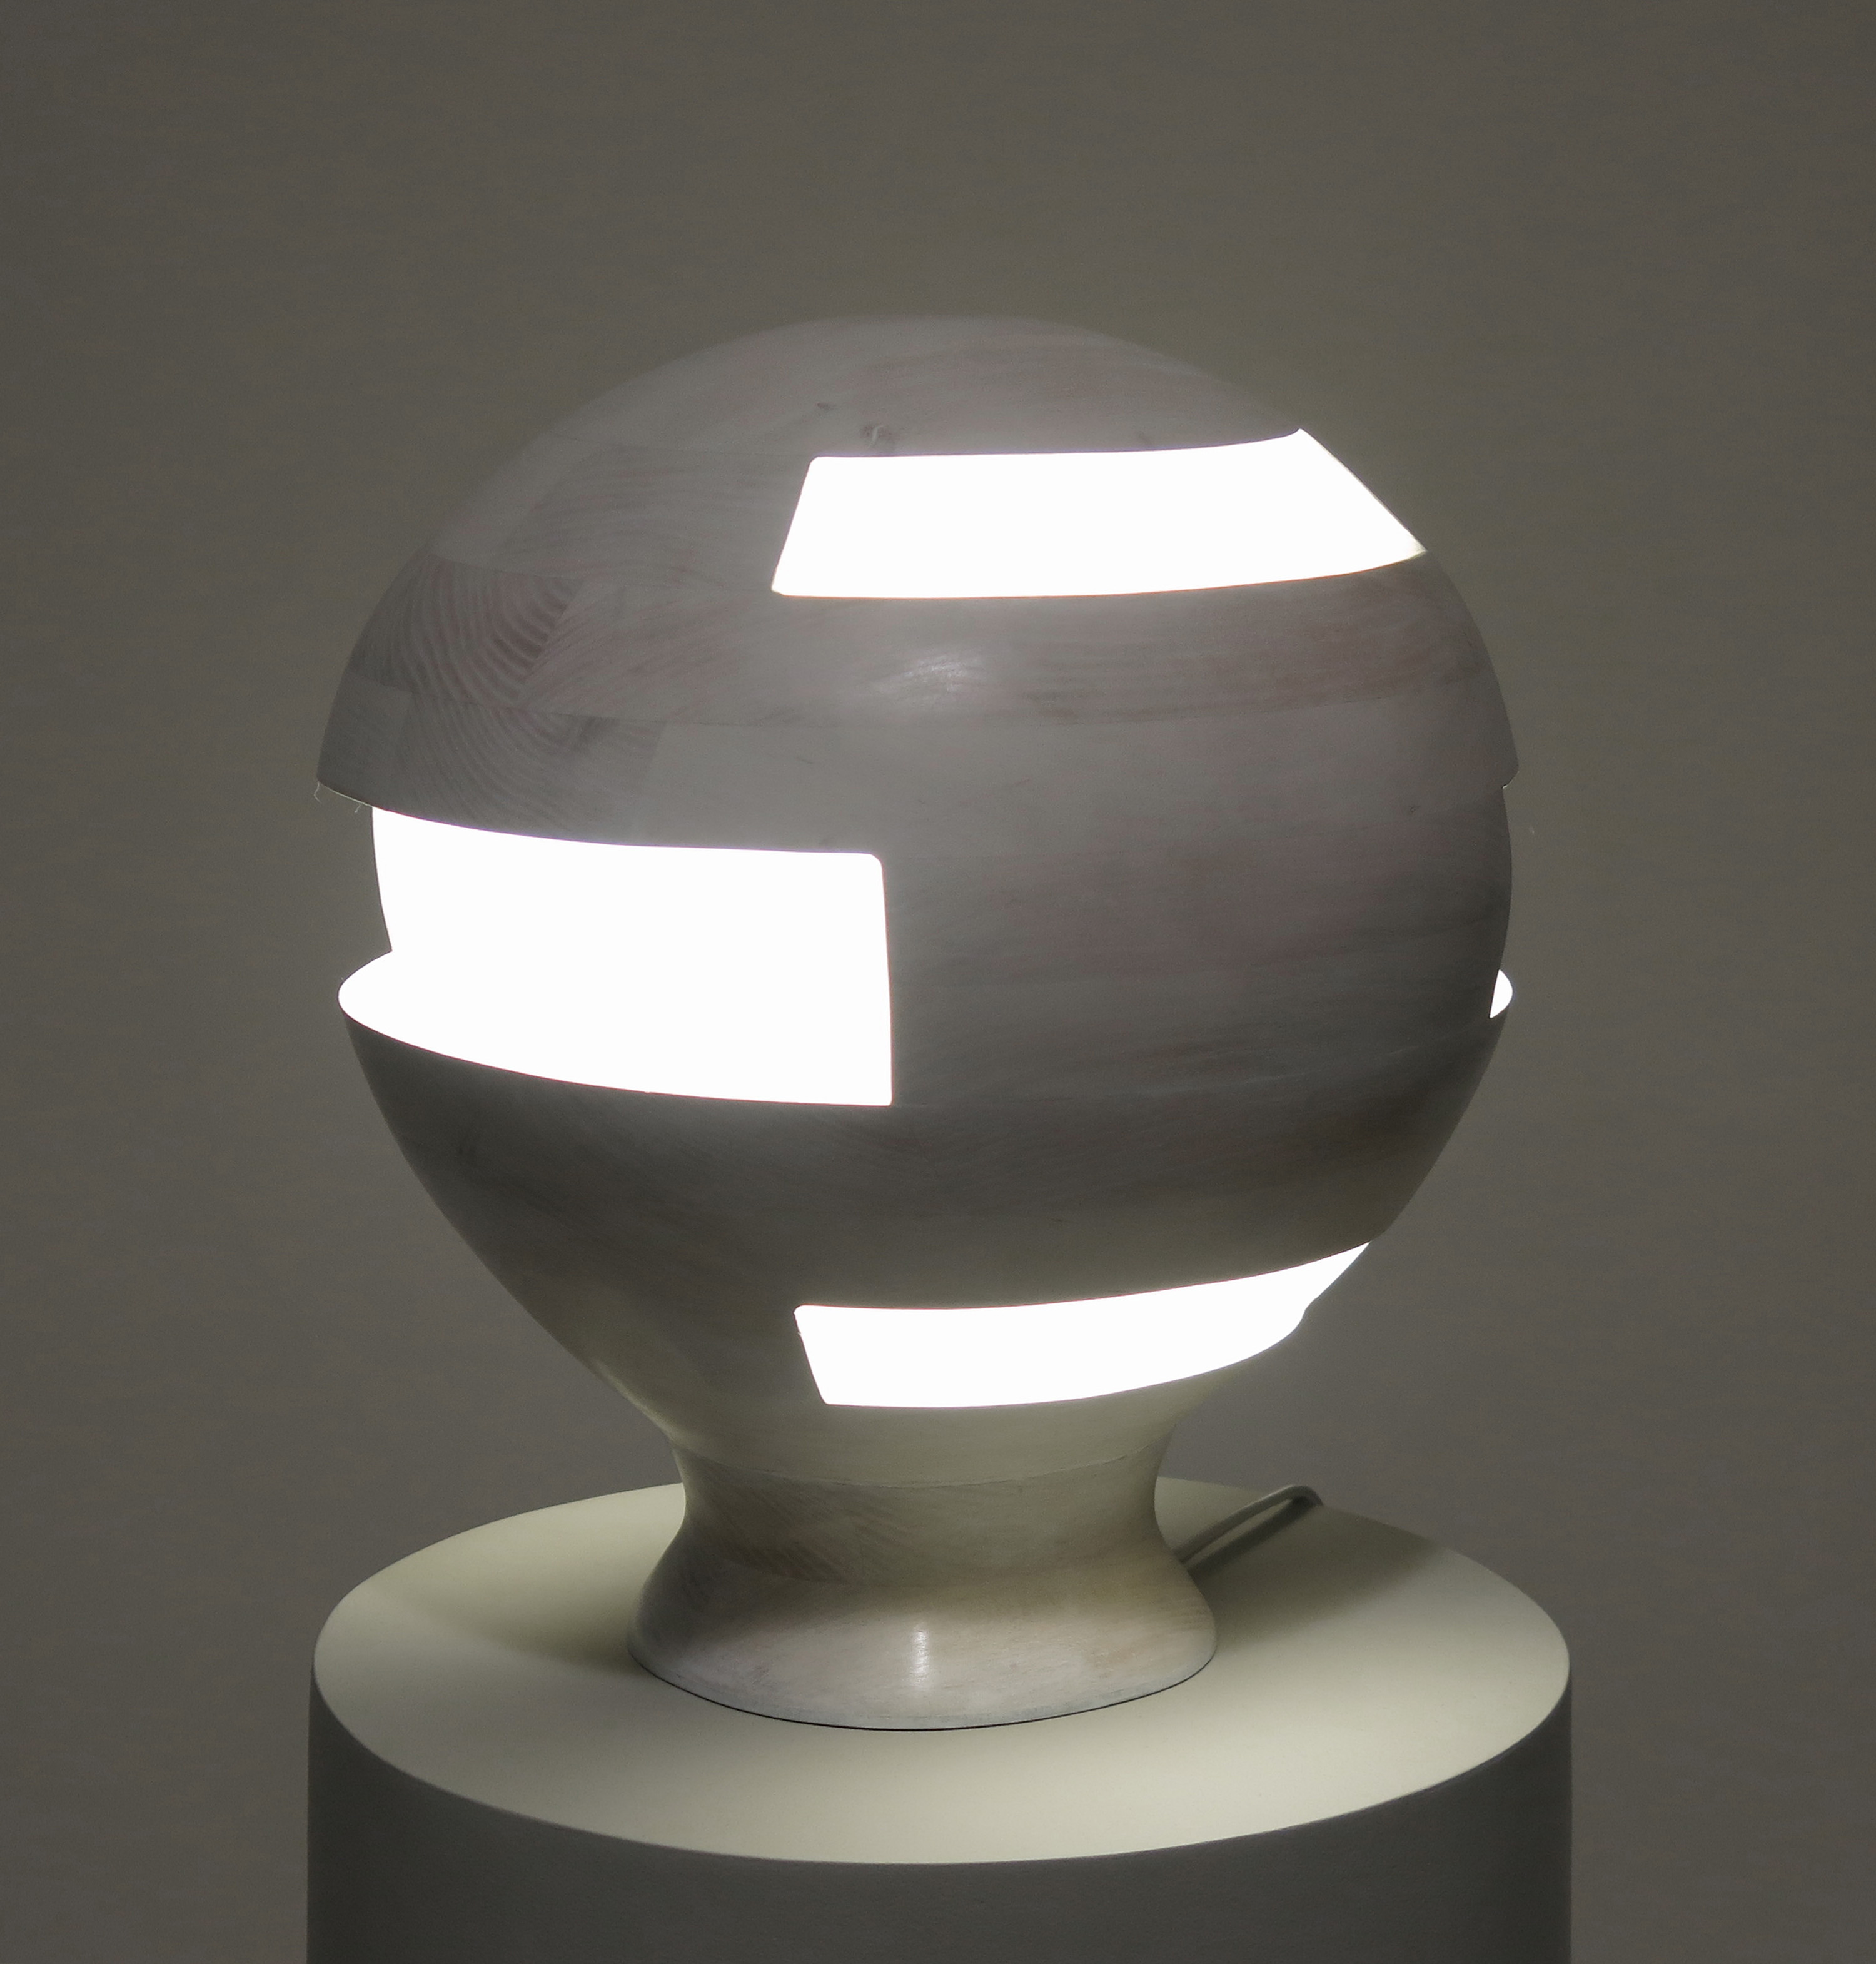 This photo shows a spherical lamp made of wood with irregular cutouts for the light to pass through